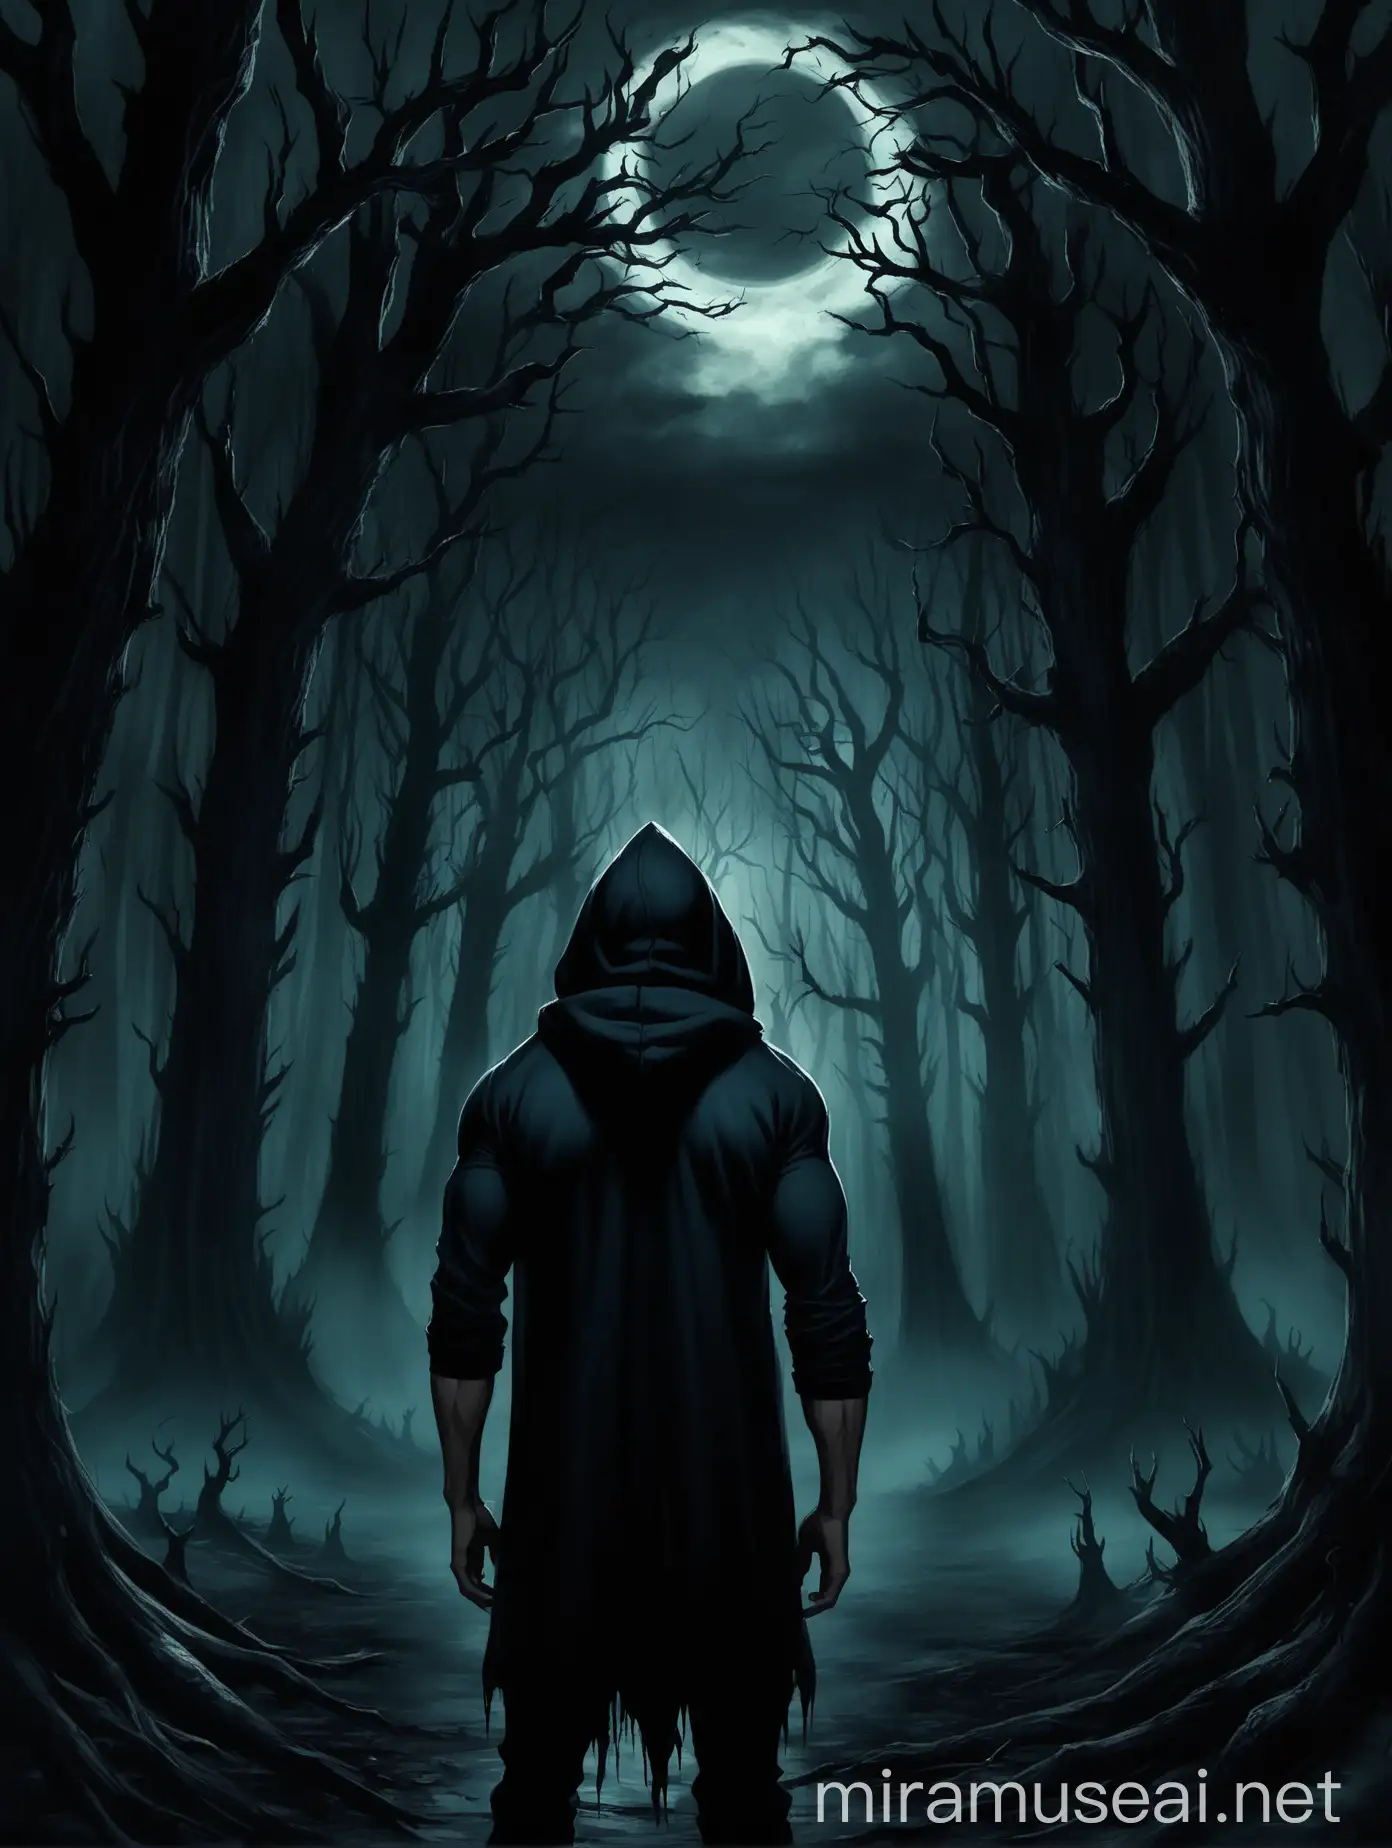 Mysterious Hooded Man Confronting Dark Forest at Midnight